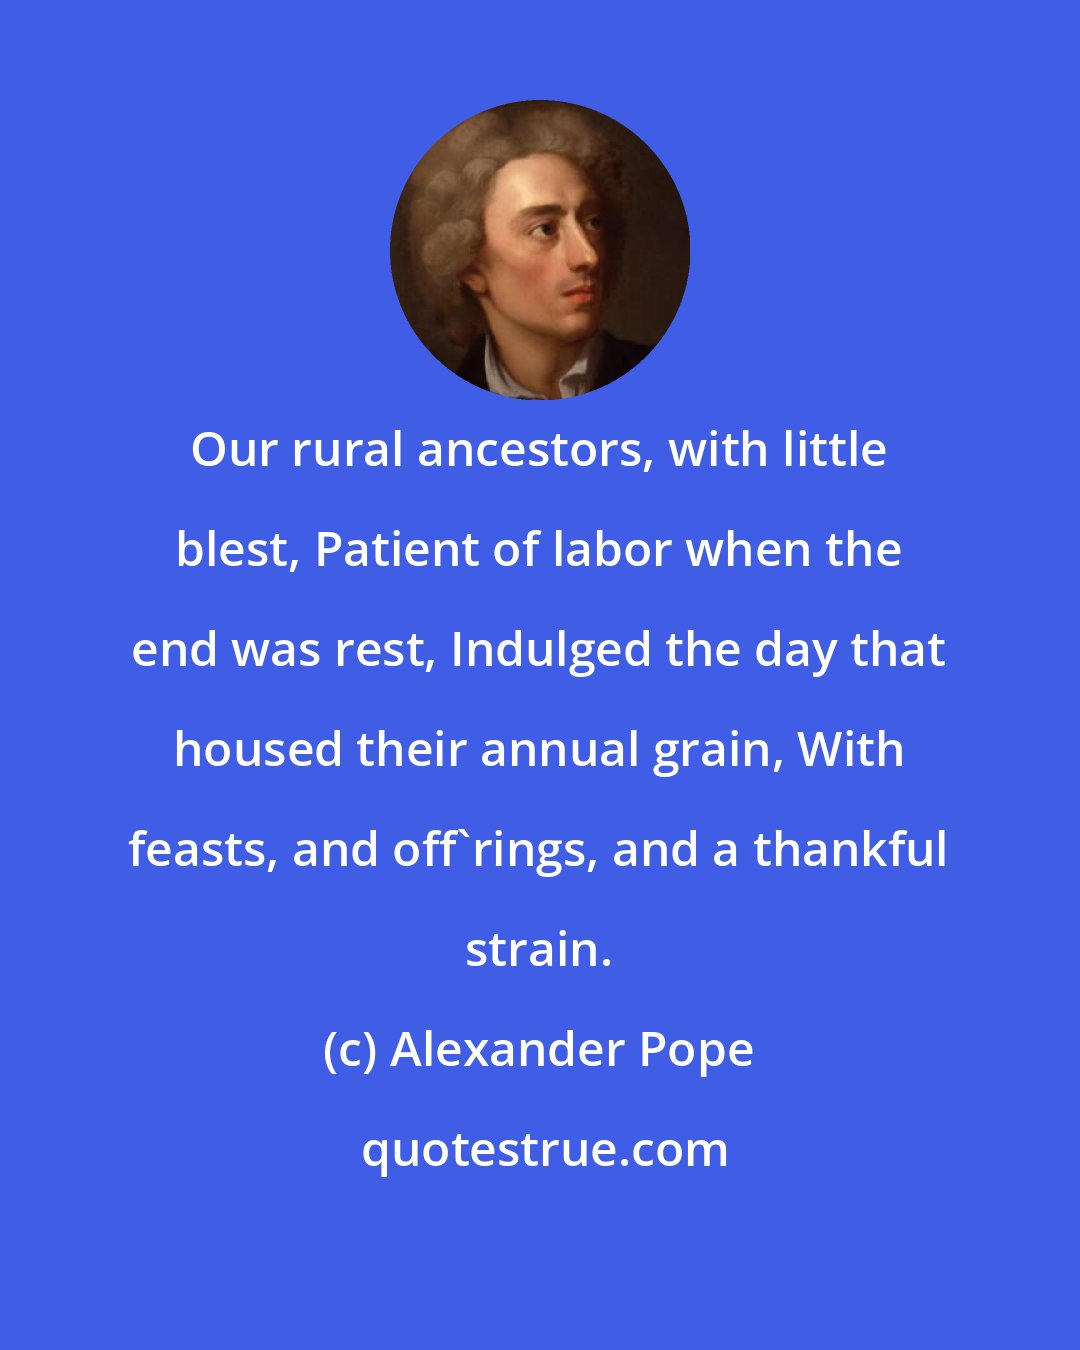 Alexander Pope: Our rural ancestors, with little blest, Patient of labor when the end was rest, Indulged the day that housed their annual grain, With feasts, and off'rings, and a thankful strain.